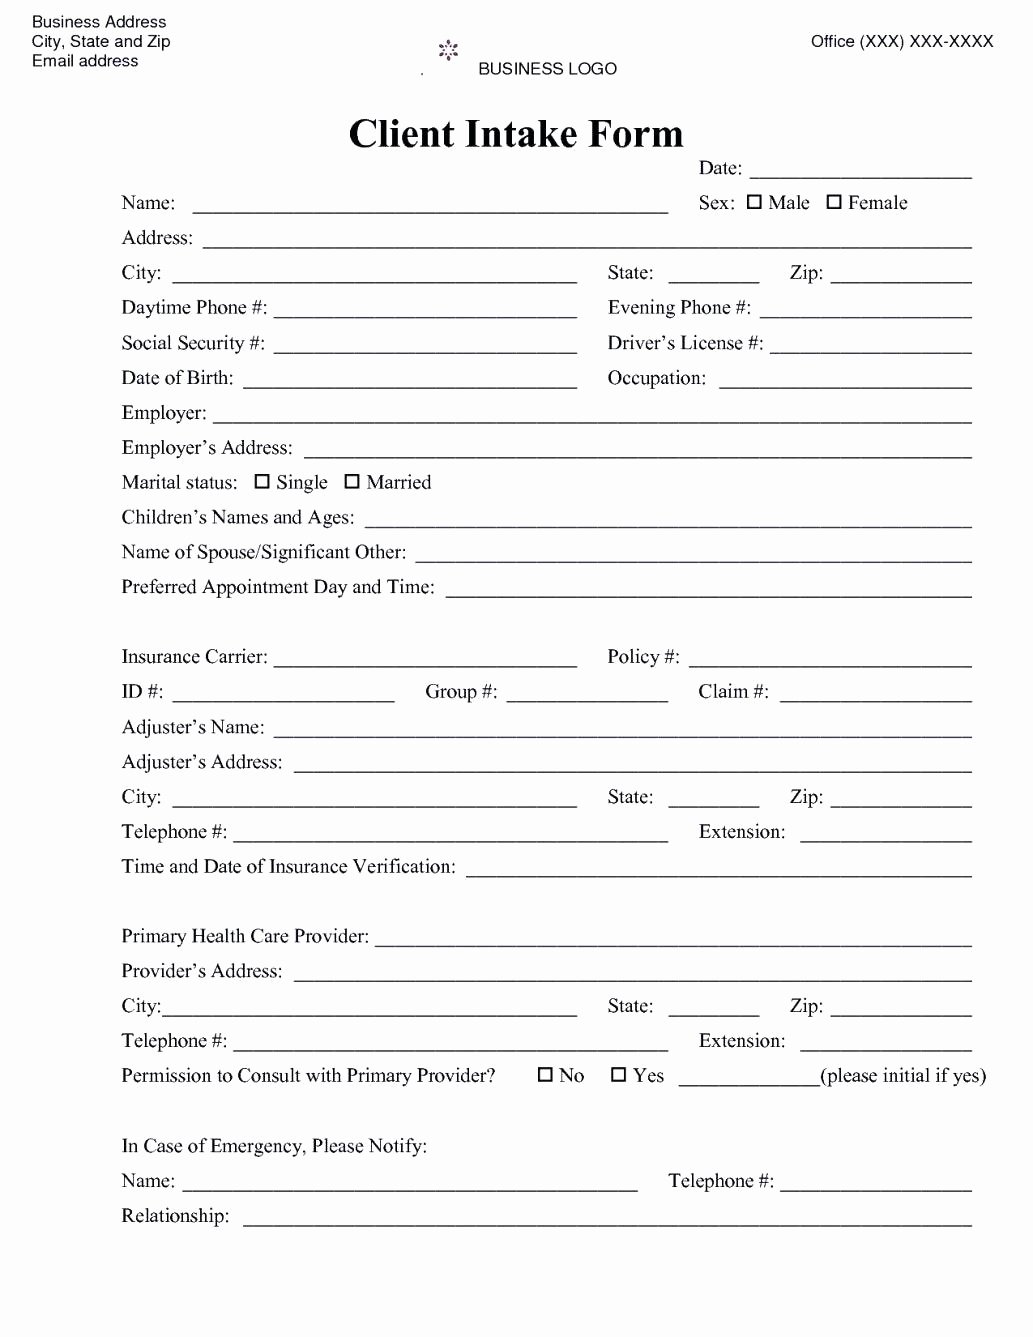 Patient Intake form Template Excel Joselinohouse